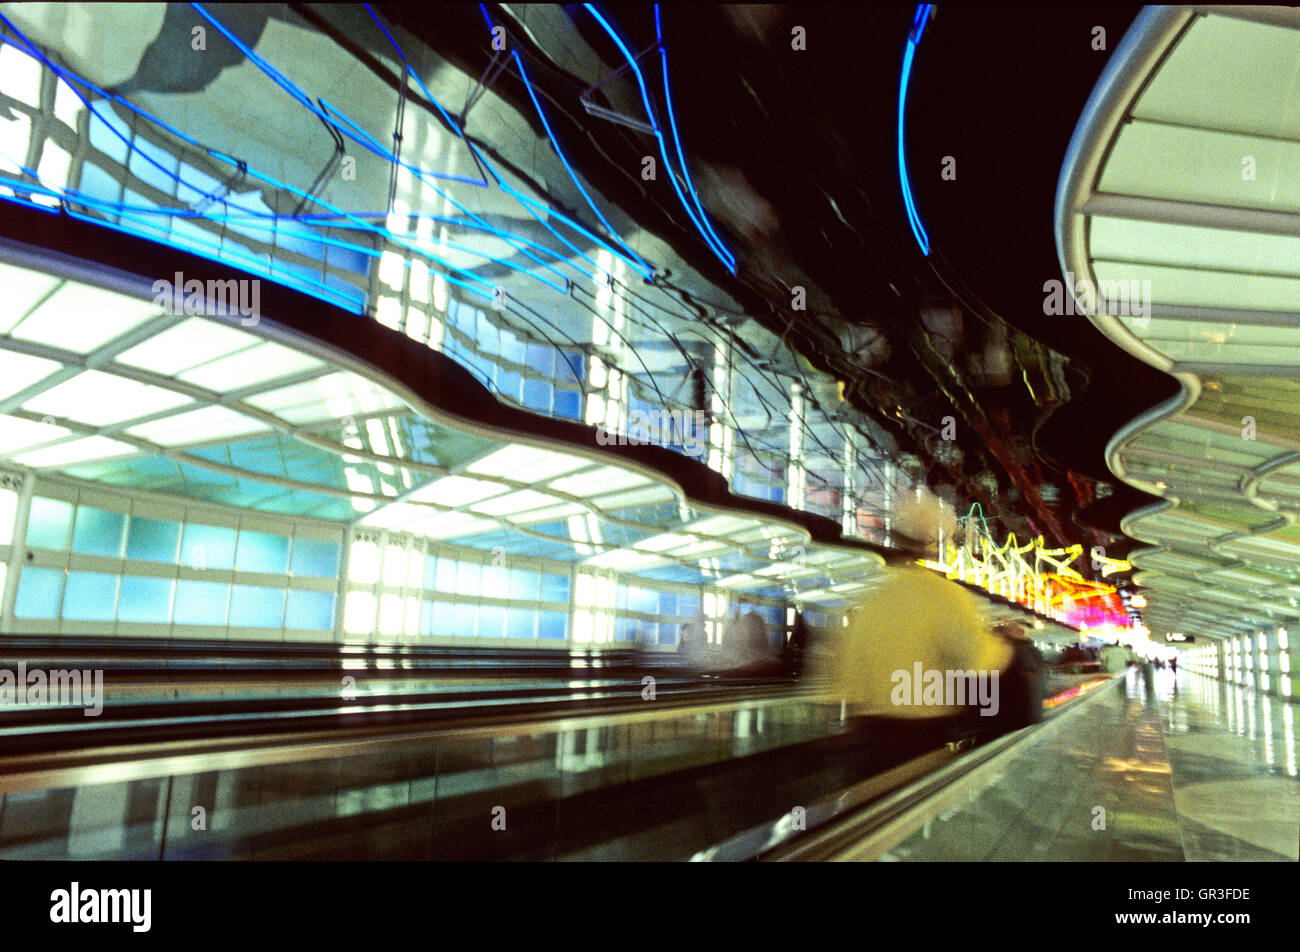 A time-lapse exposure of a moving walkway in Chicago's O'Hare Airport captures the hurried nature of airline travel. Stock Photo